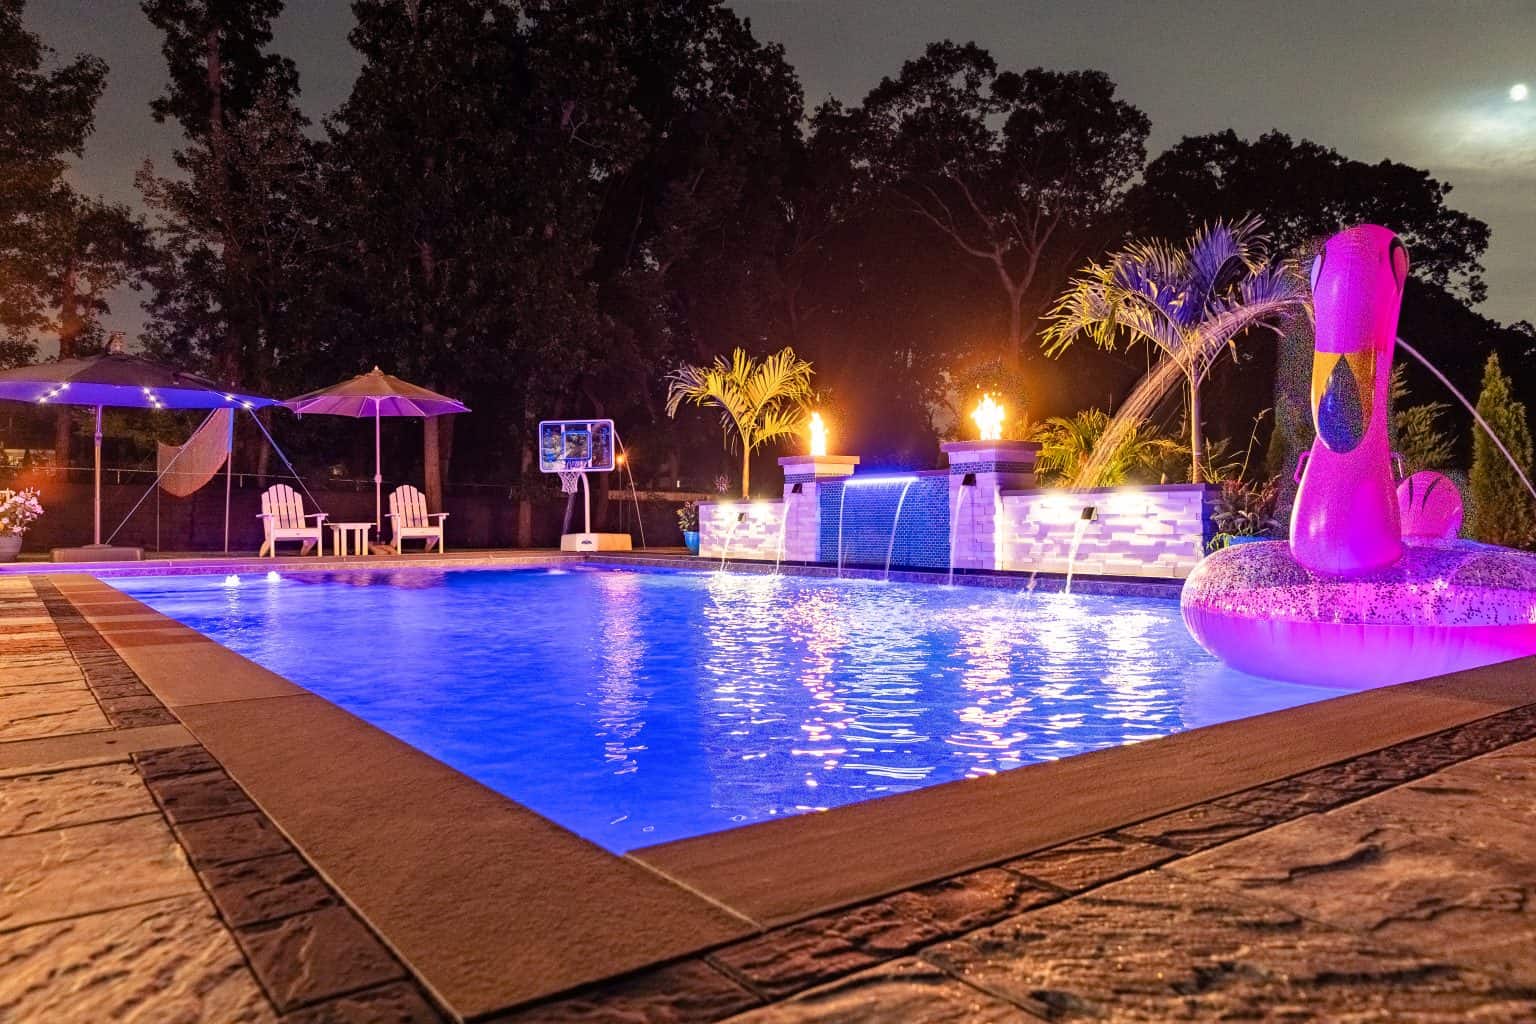 pool and backyard at dusk with ambient lighting and flamingo pool float.